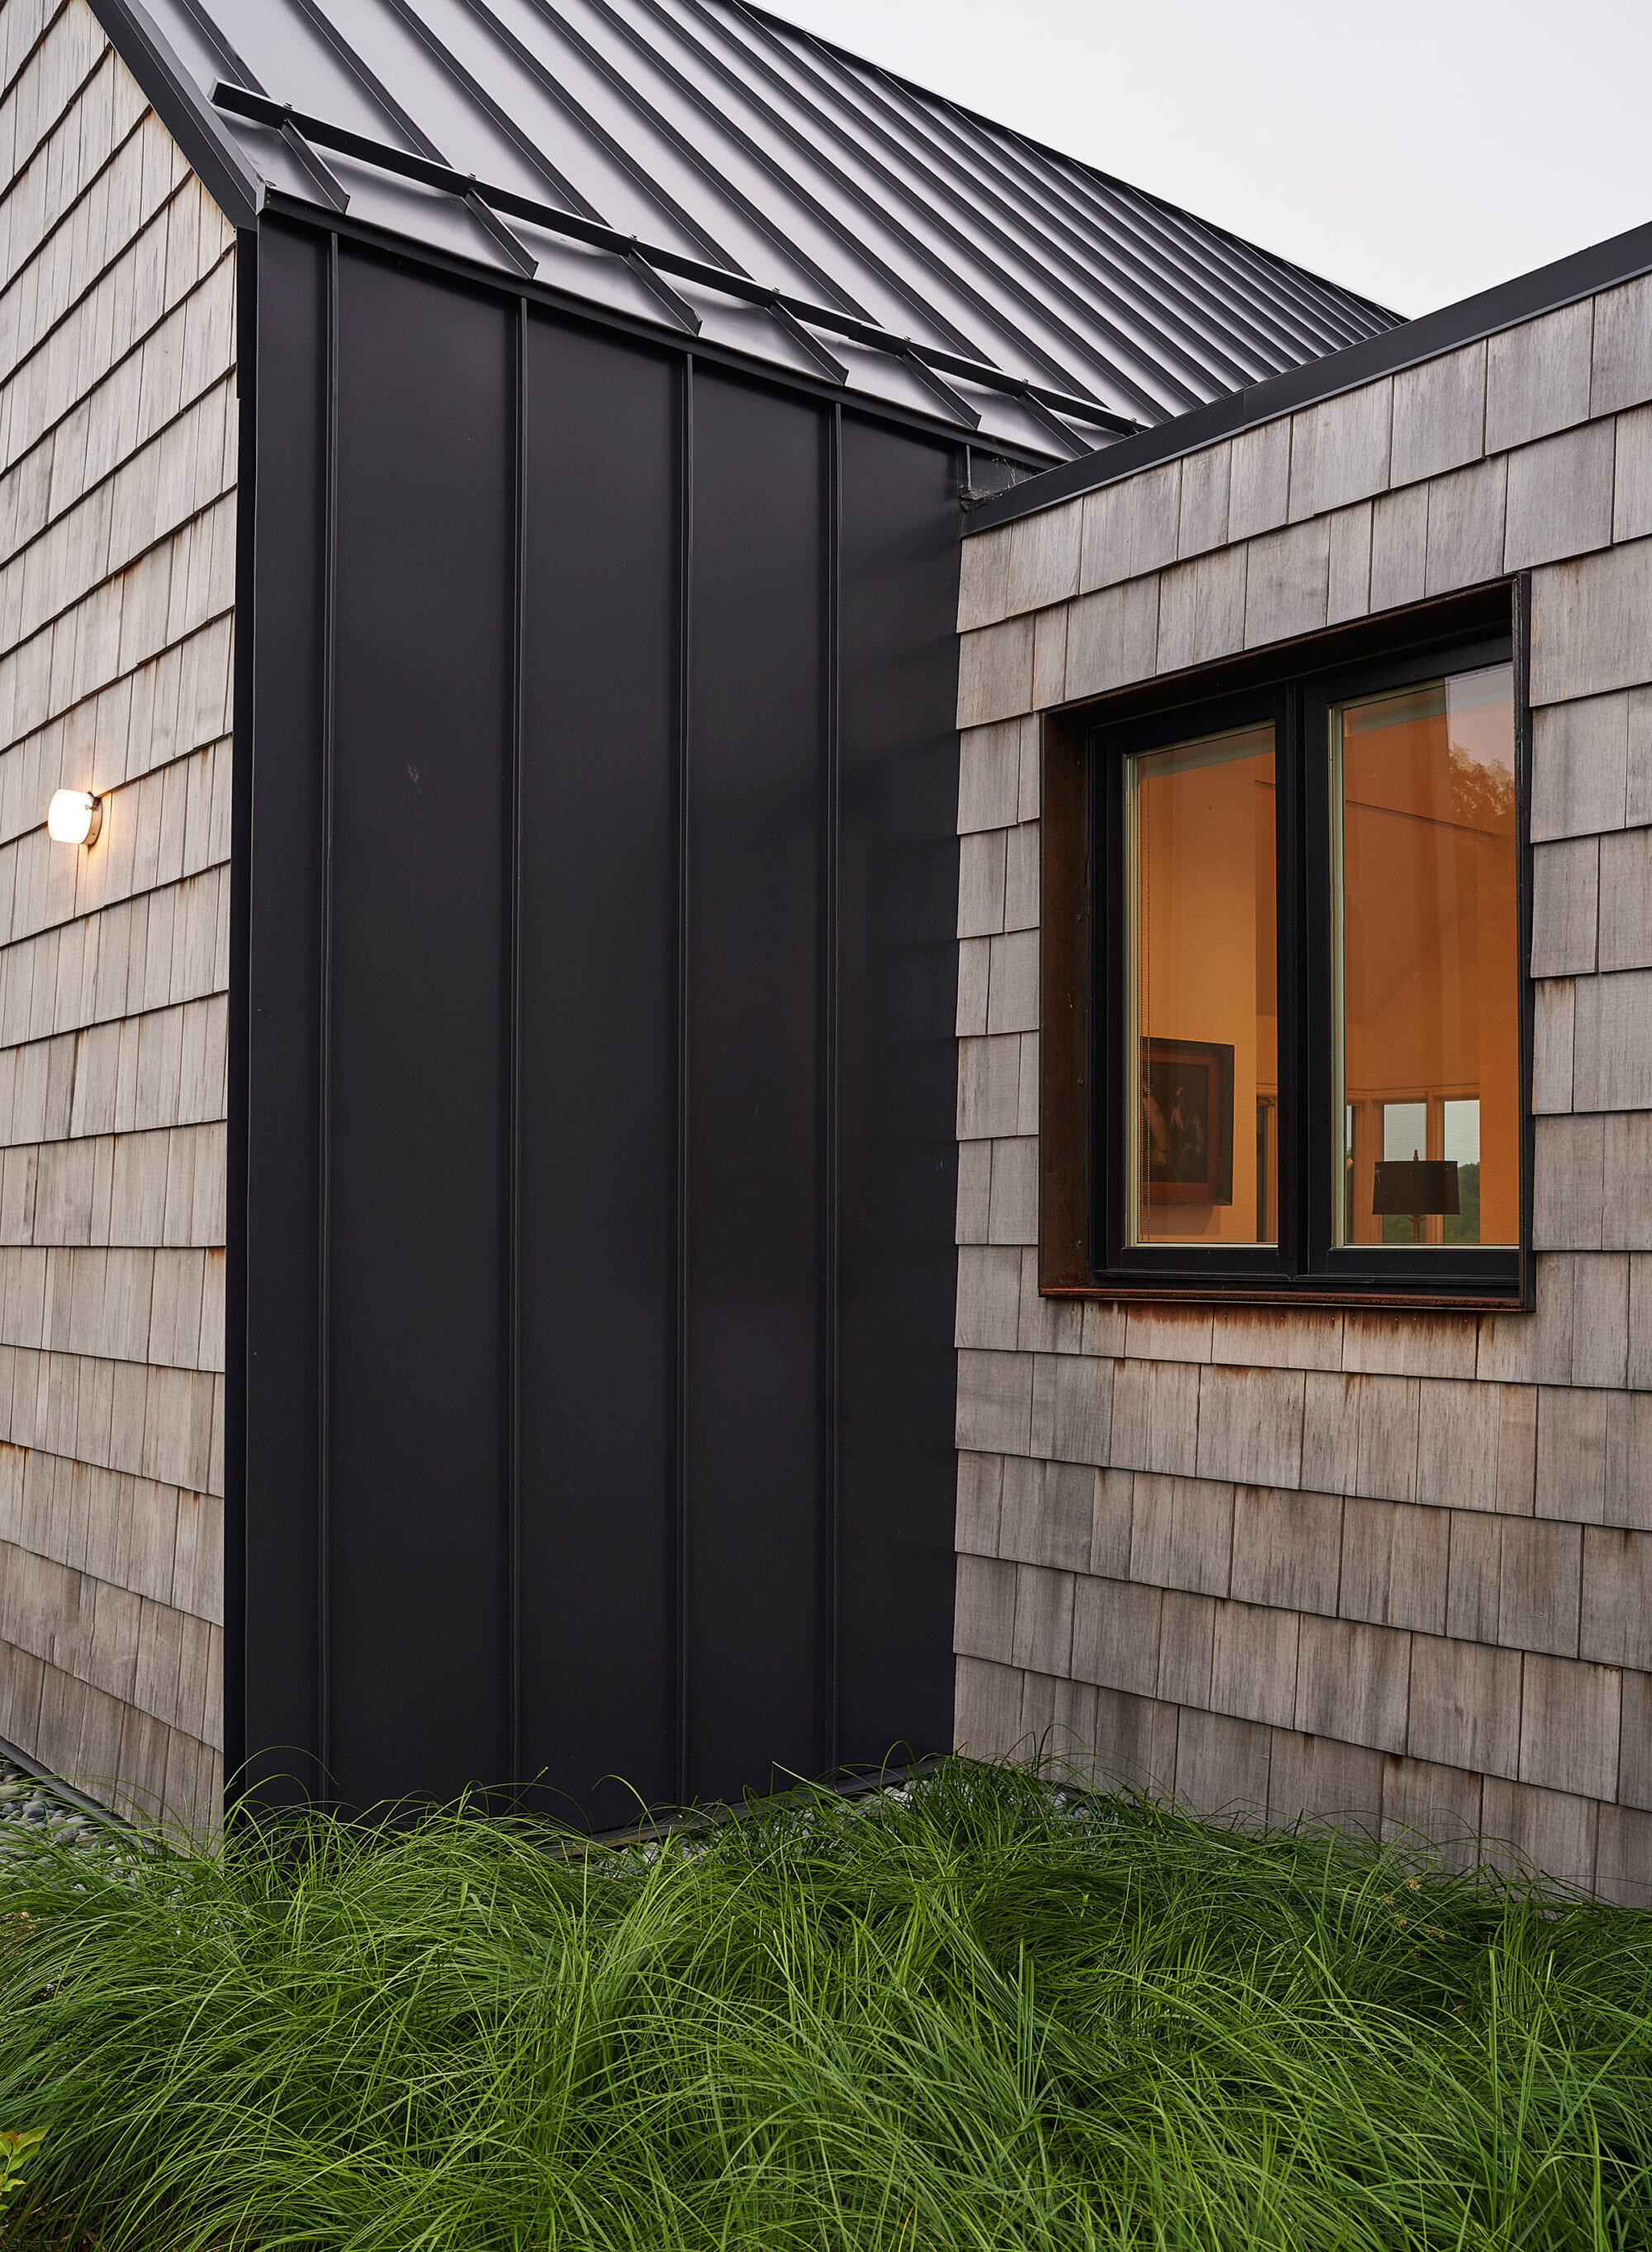 Exterior Update: Siding Inspiration, our game plan, and color scheme ideas - Nadine Stay | Board and batten vertical siding and weathered gray cedar shake shingle siding. | Photo Source: Collective Office